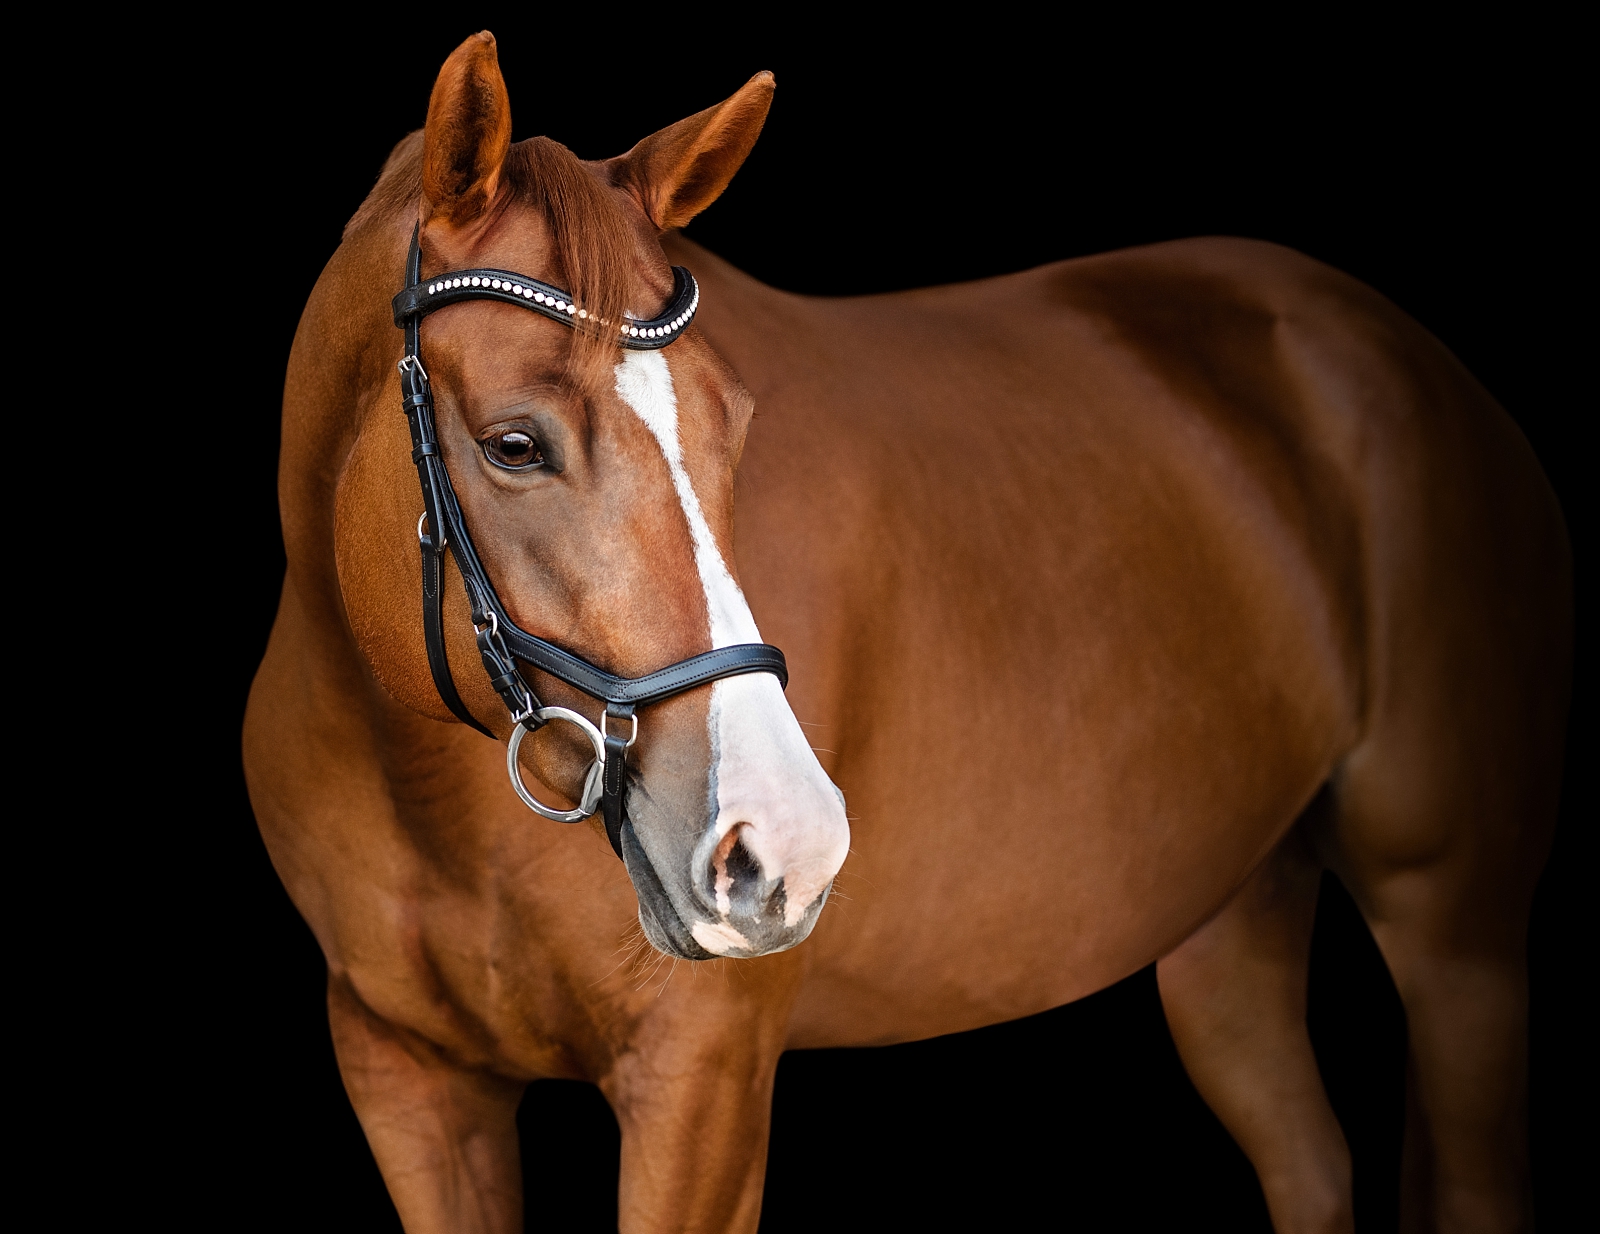 Tallahassee equine fine art by professional photographer. Chestnut warmblood mare on black background.